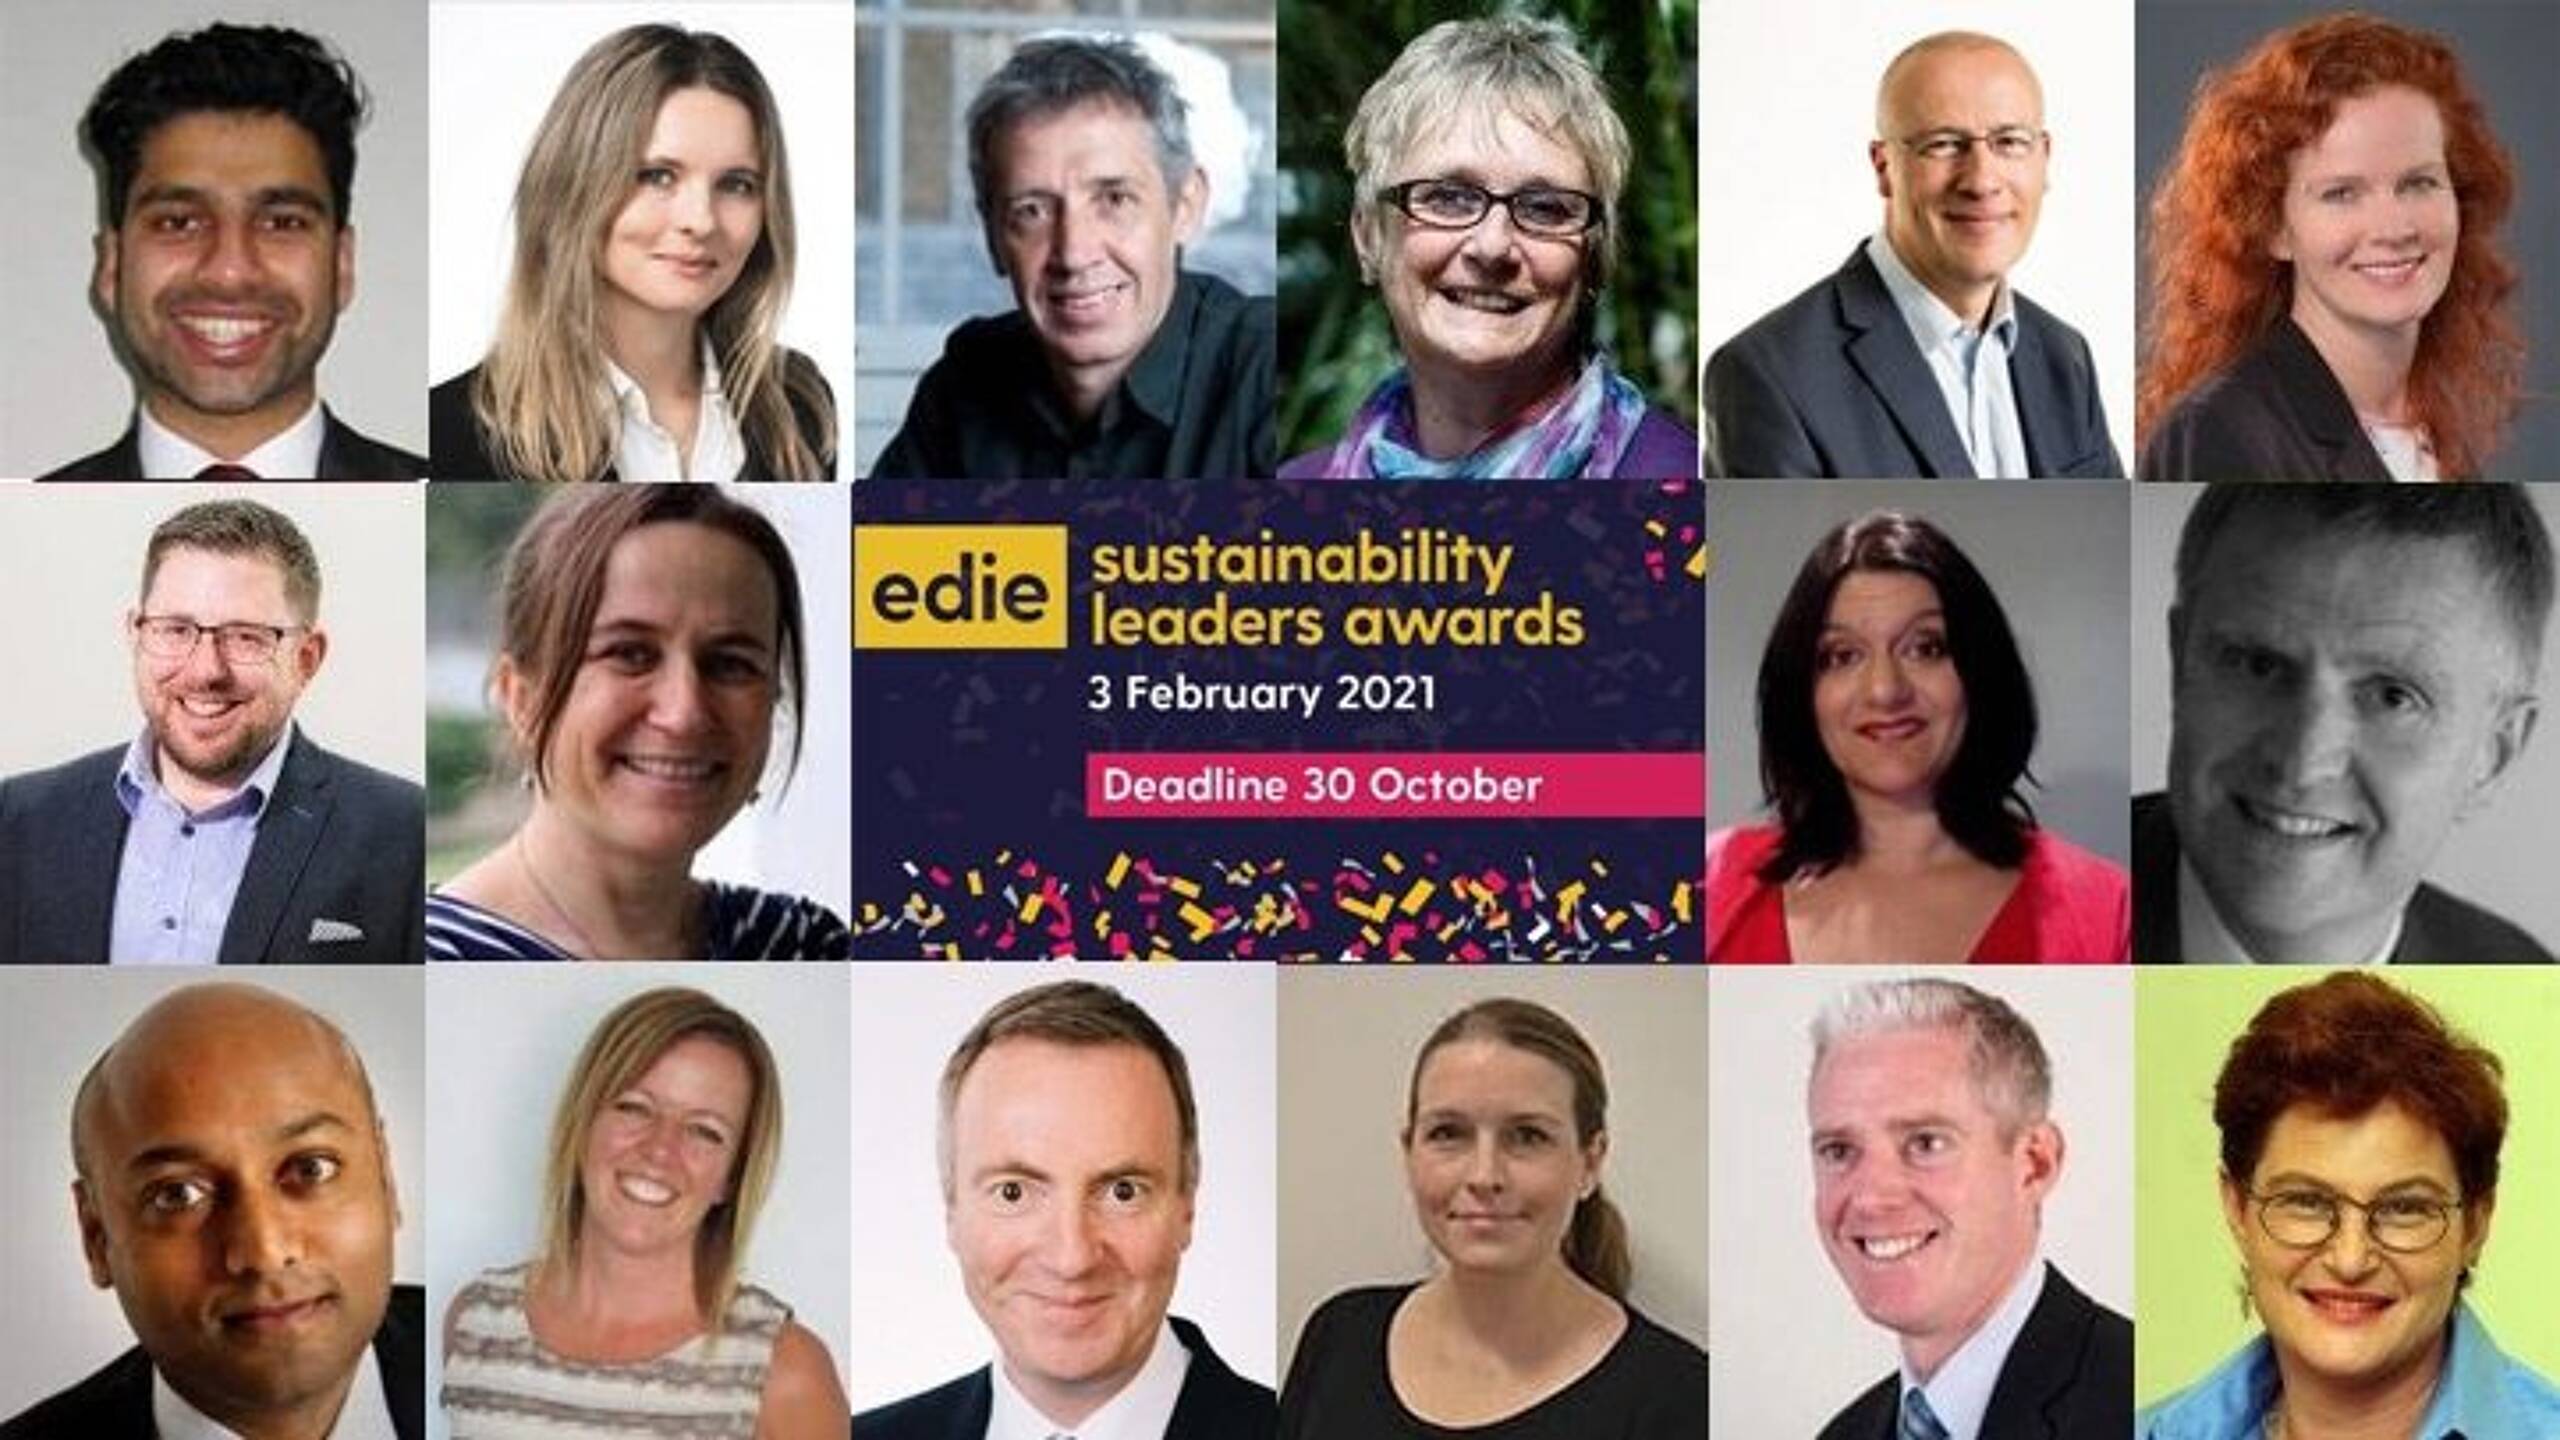 Sustainability Leaders Awards 2021: Meet the judges